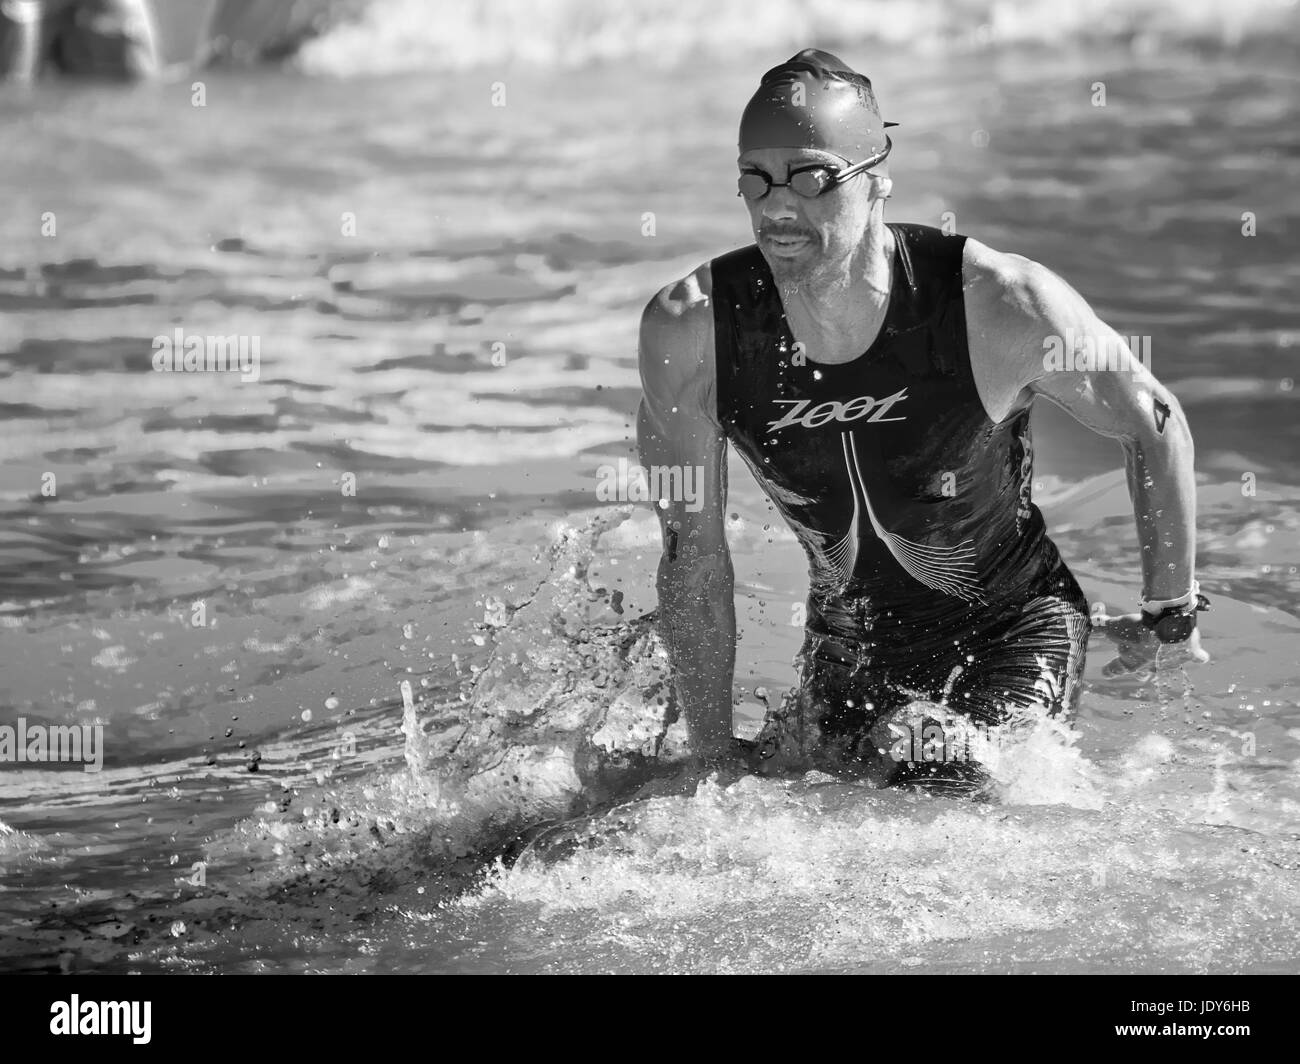 Pescara, Italy - June 18, 2017: Arrival of Pedraza Sebastian, athletes at the end of the swimming test at Ironman 70.3 in Pescara Stock Photo